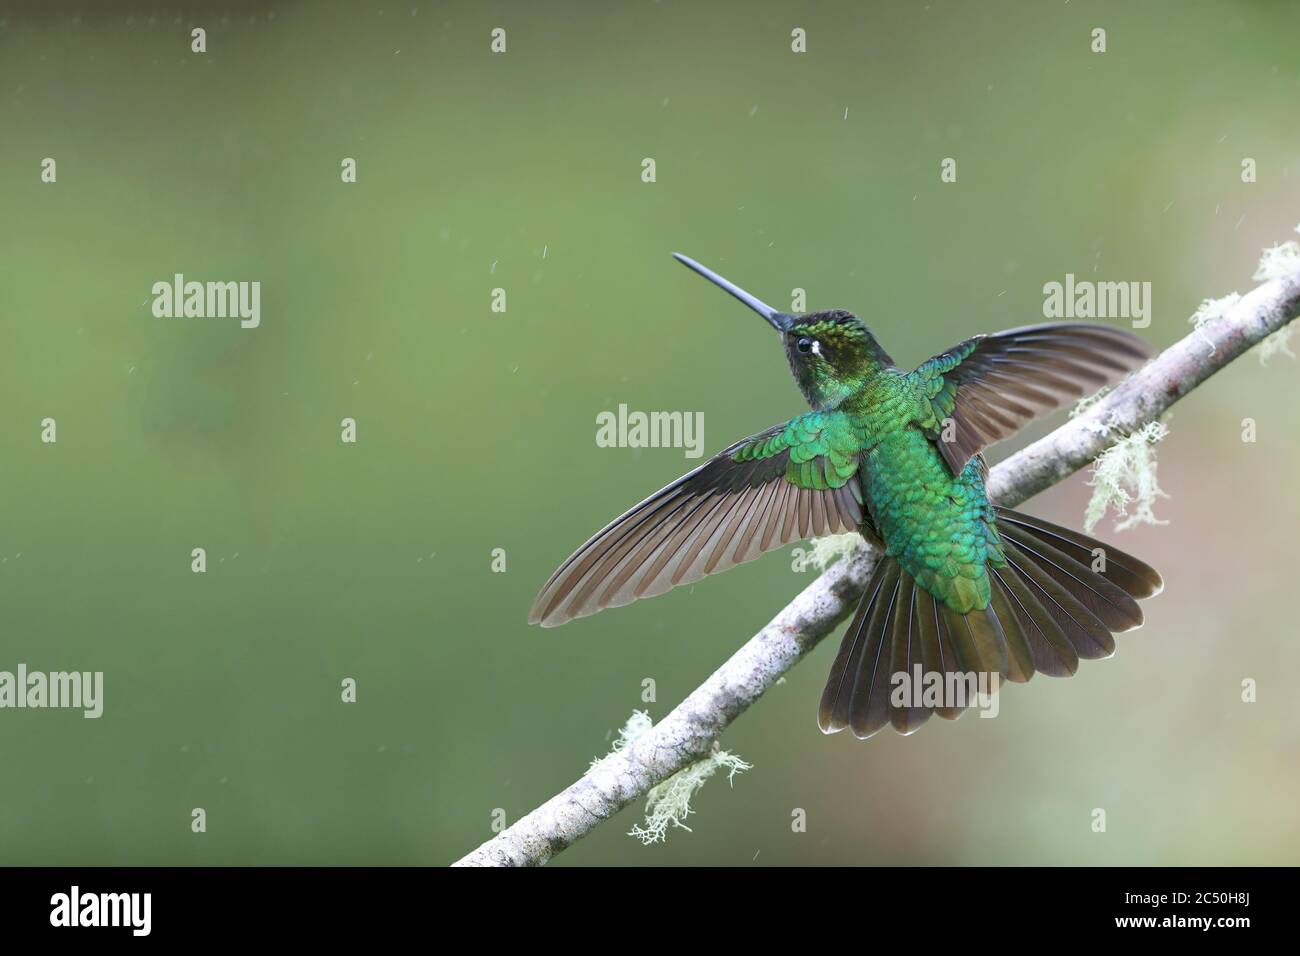 Talamanca hummingbird (Eugenes spectabilis), male perching with outstretched wings on a twig, rear view, Costa Rica, Los Quetzales National Park Stock Photo